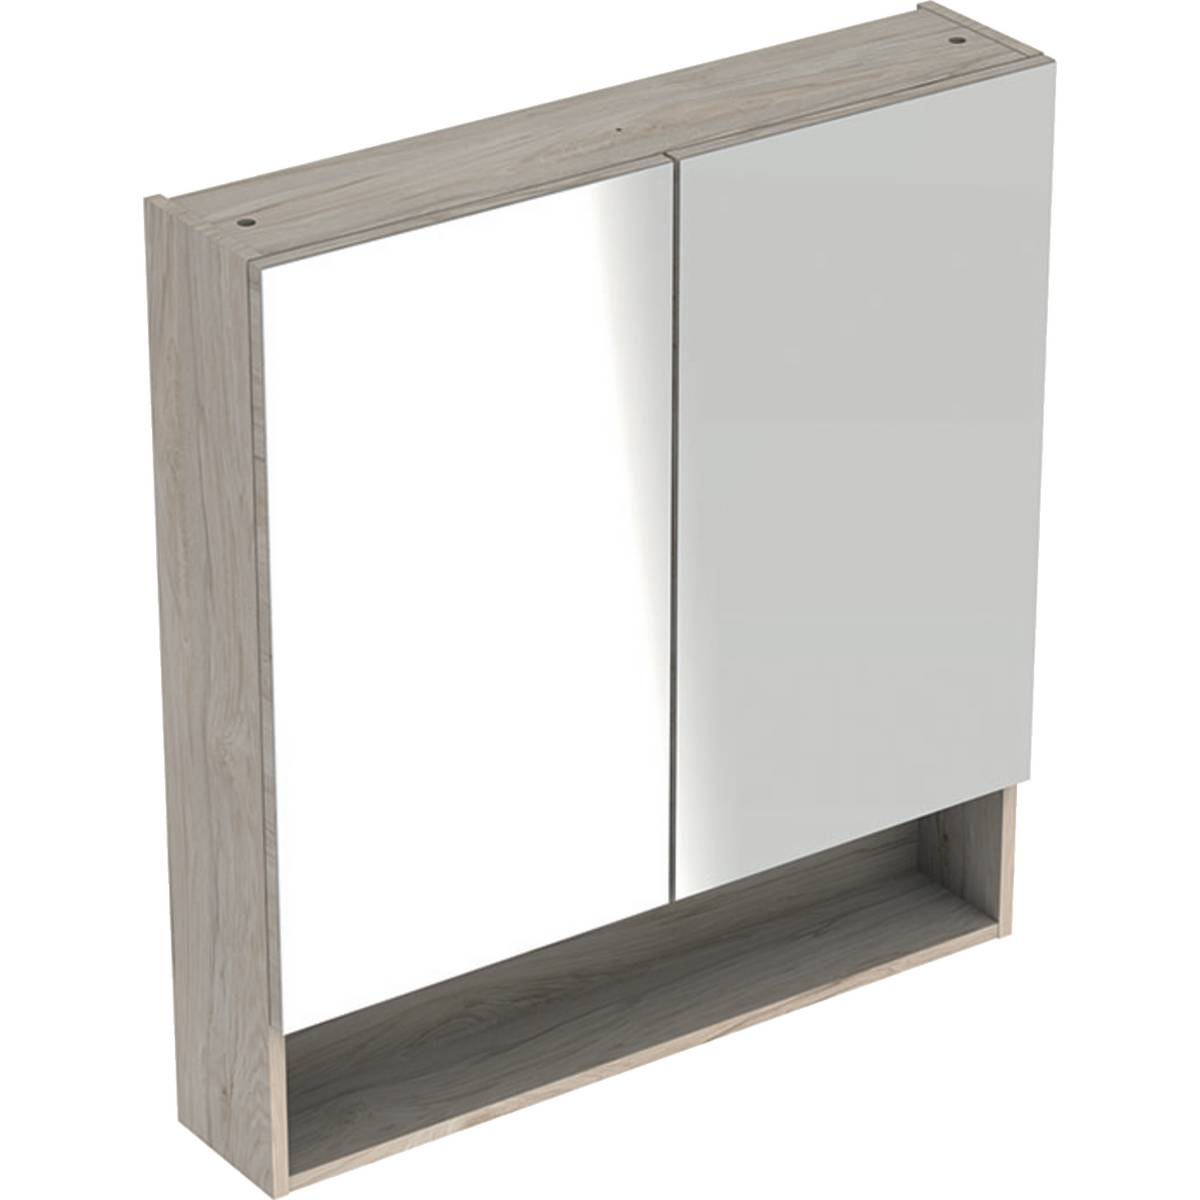 Selnova Square mirror cabinet with two doors